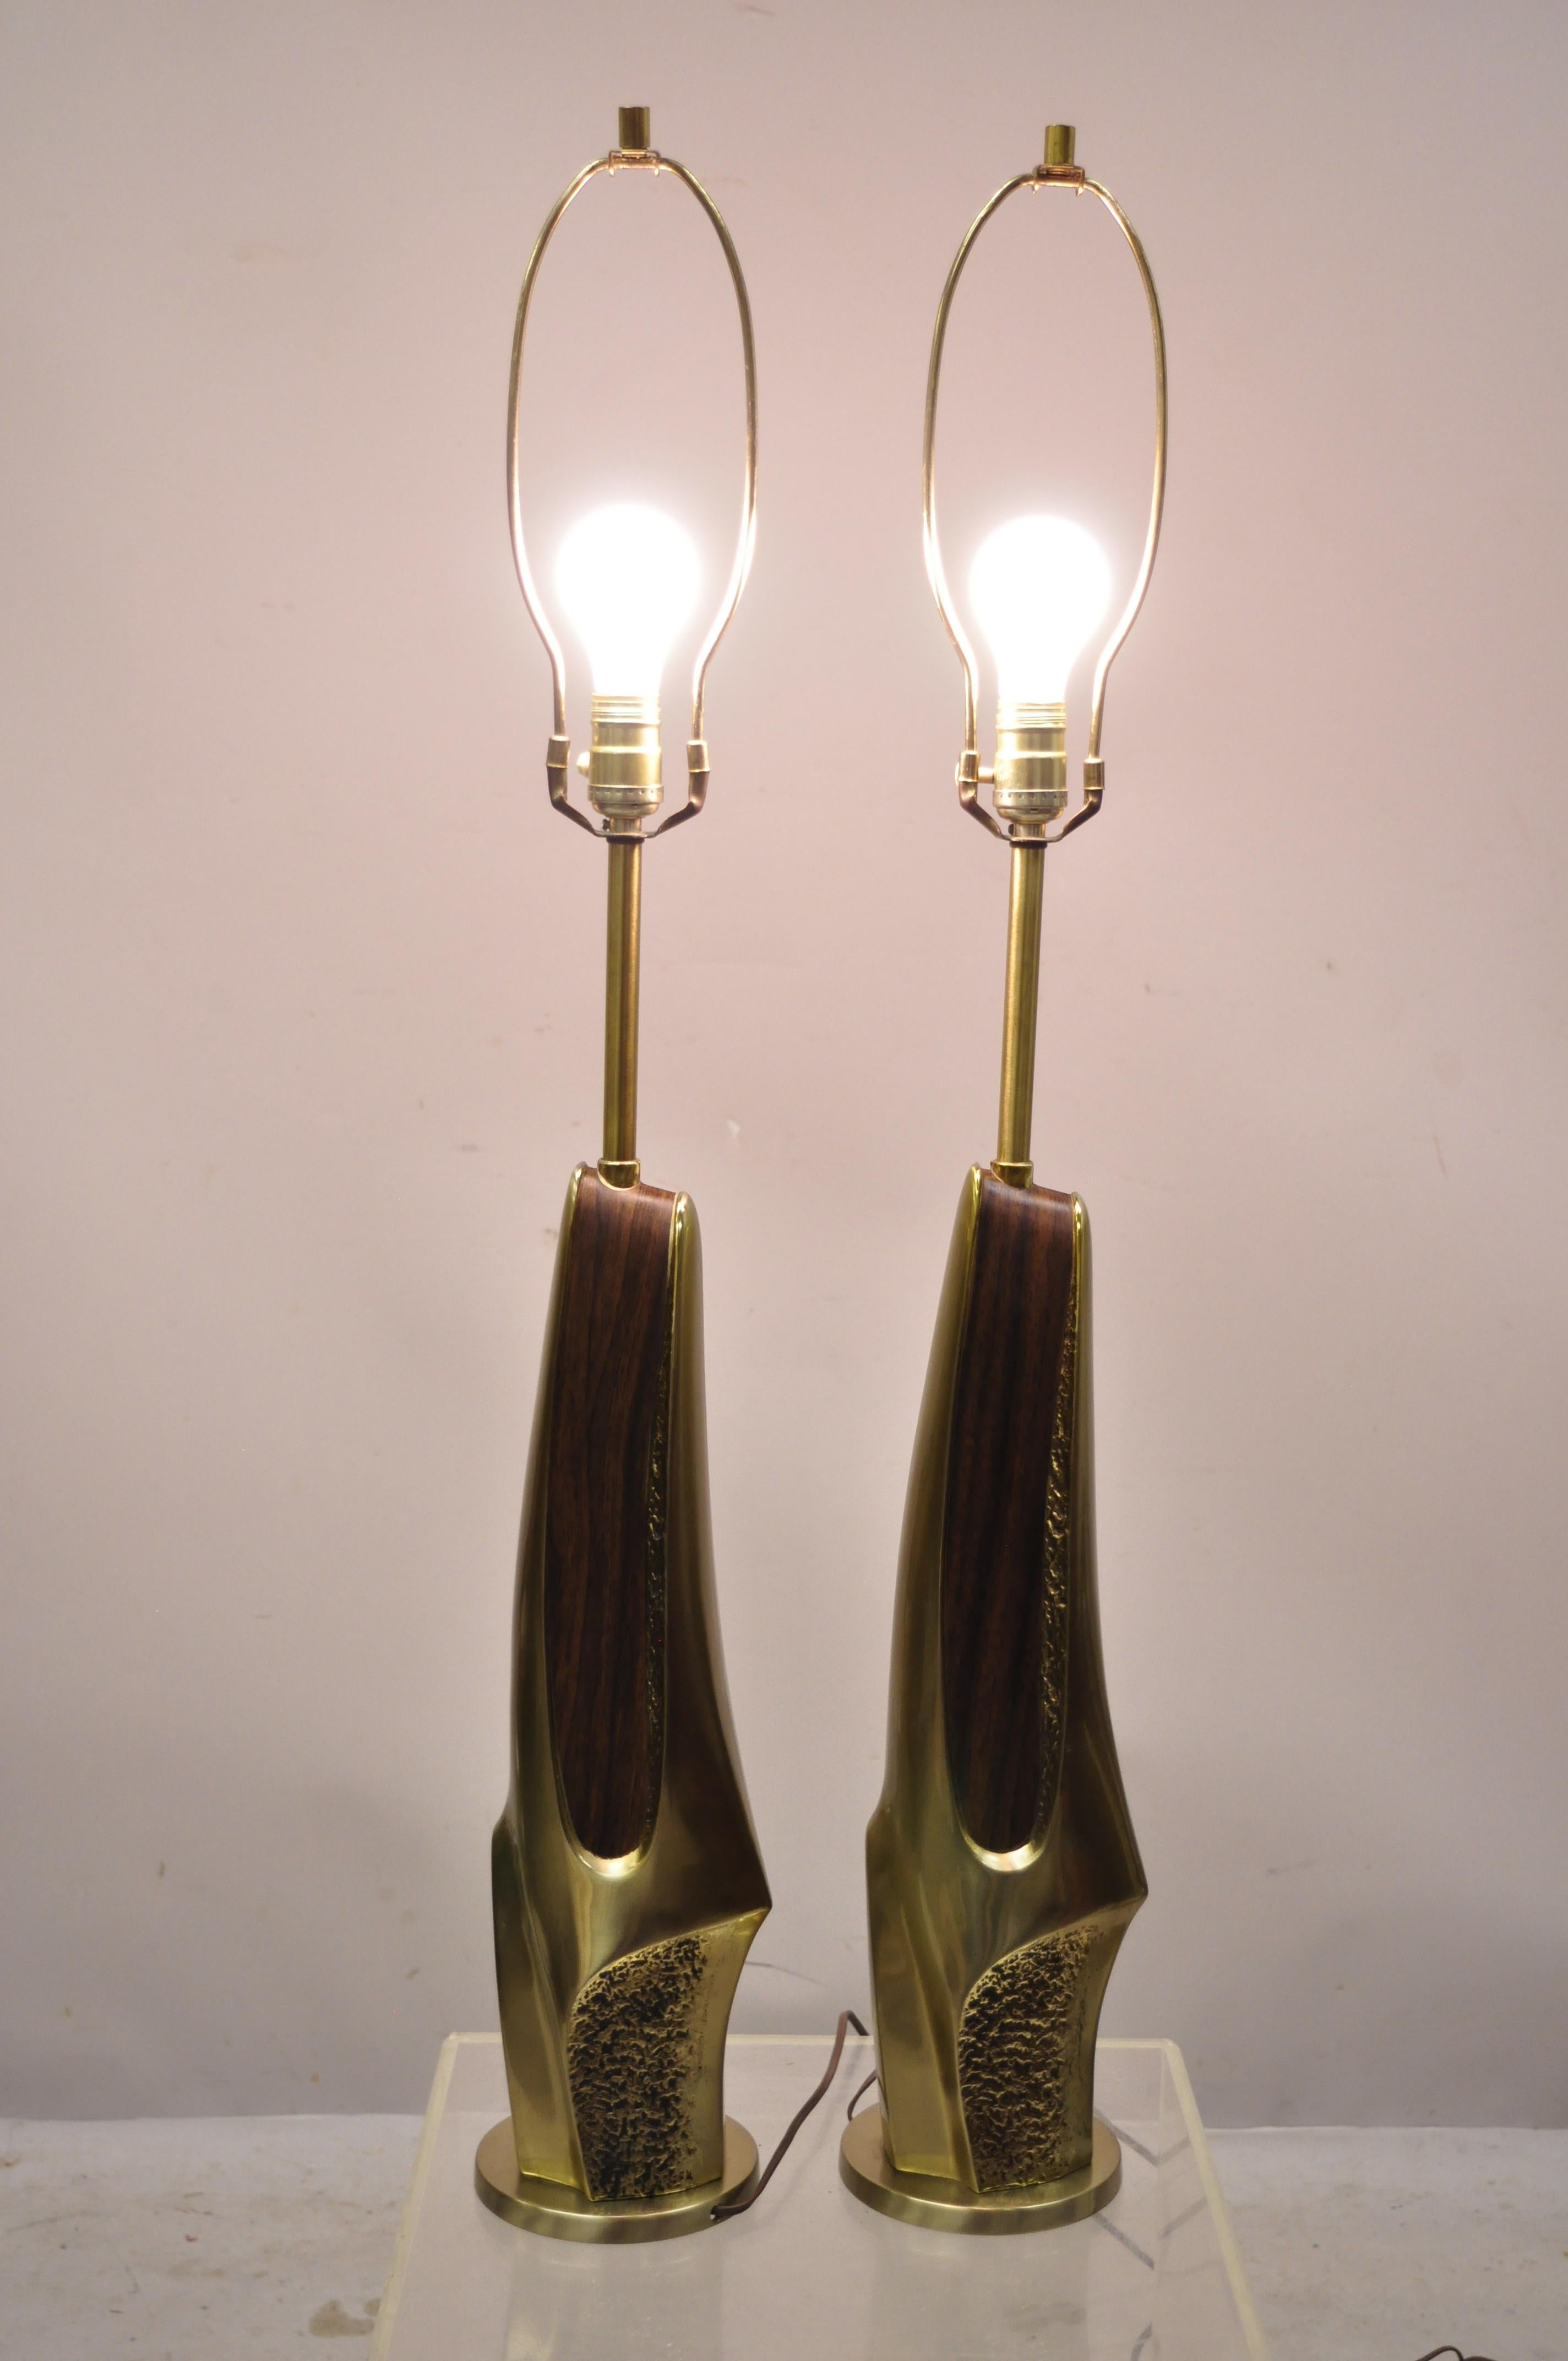 Laurel Mid-Century Modern Brutalist modernist brass sculptural table lamps - a pair. Item features cast brass construction, faux wood accents, very nice vintage item, clean Modernist lines, quality American craftsmanship, circa mid-20th century.